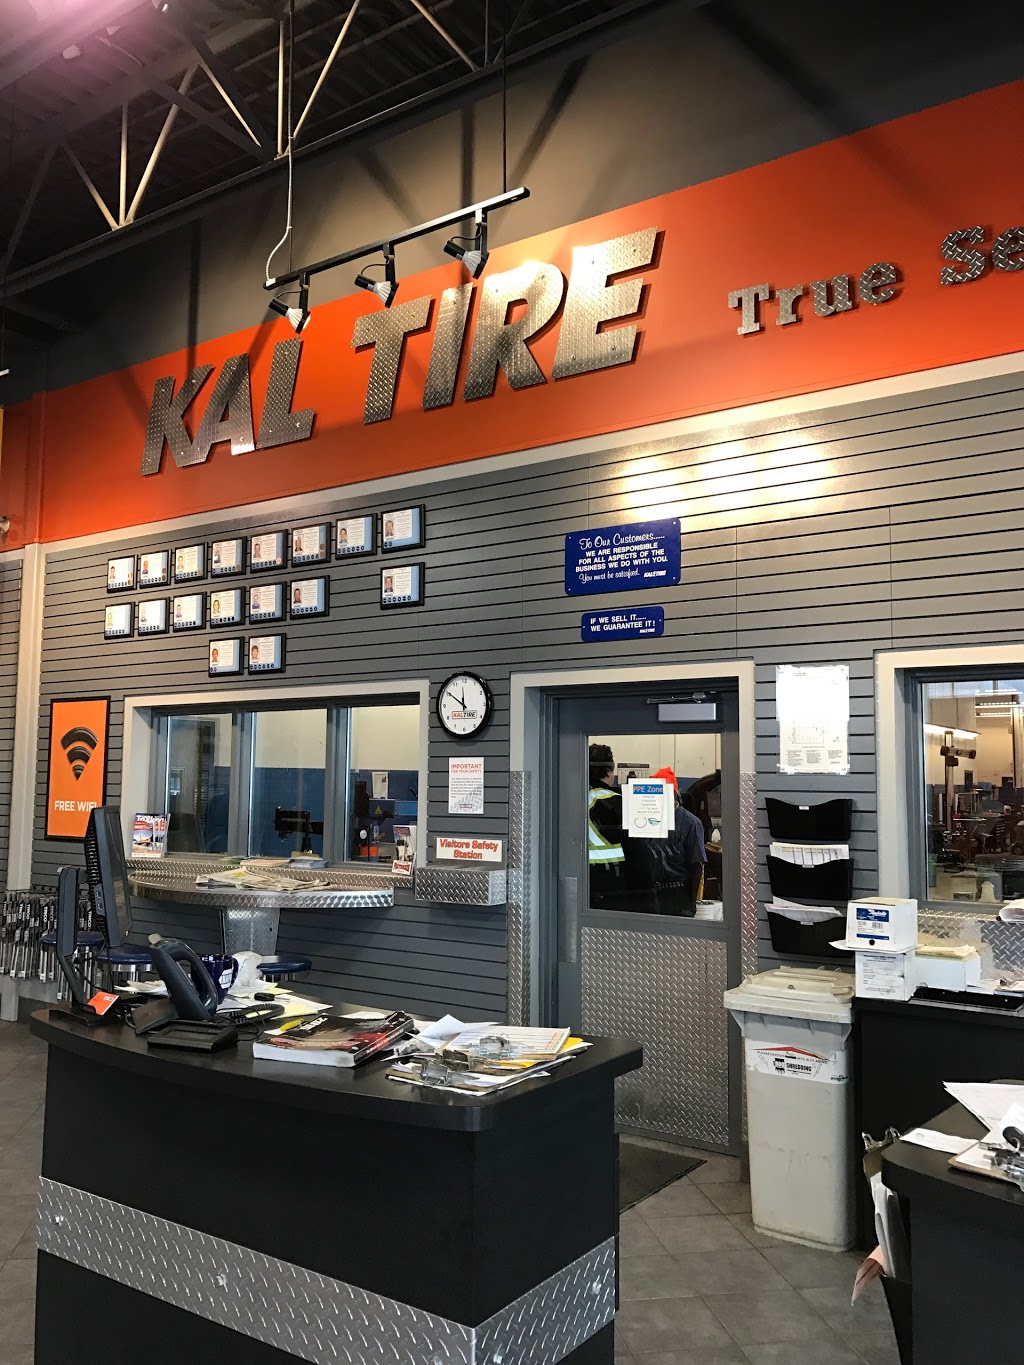 Kal Tire | car repair | 975 Coutts Way, Abbotsford, BC V2S 7M2, Canada | 6048535981 OR +1 604-853-5981